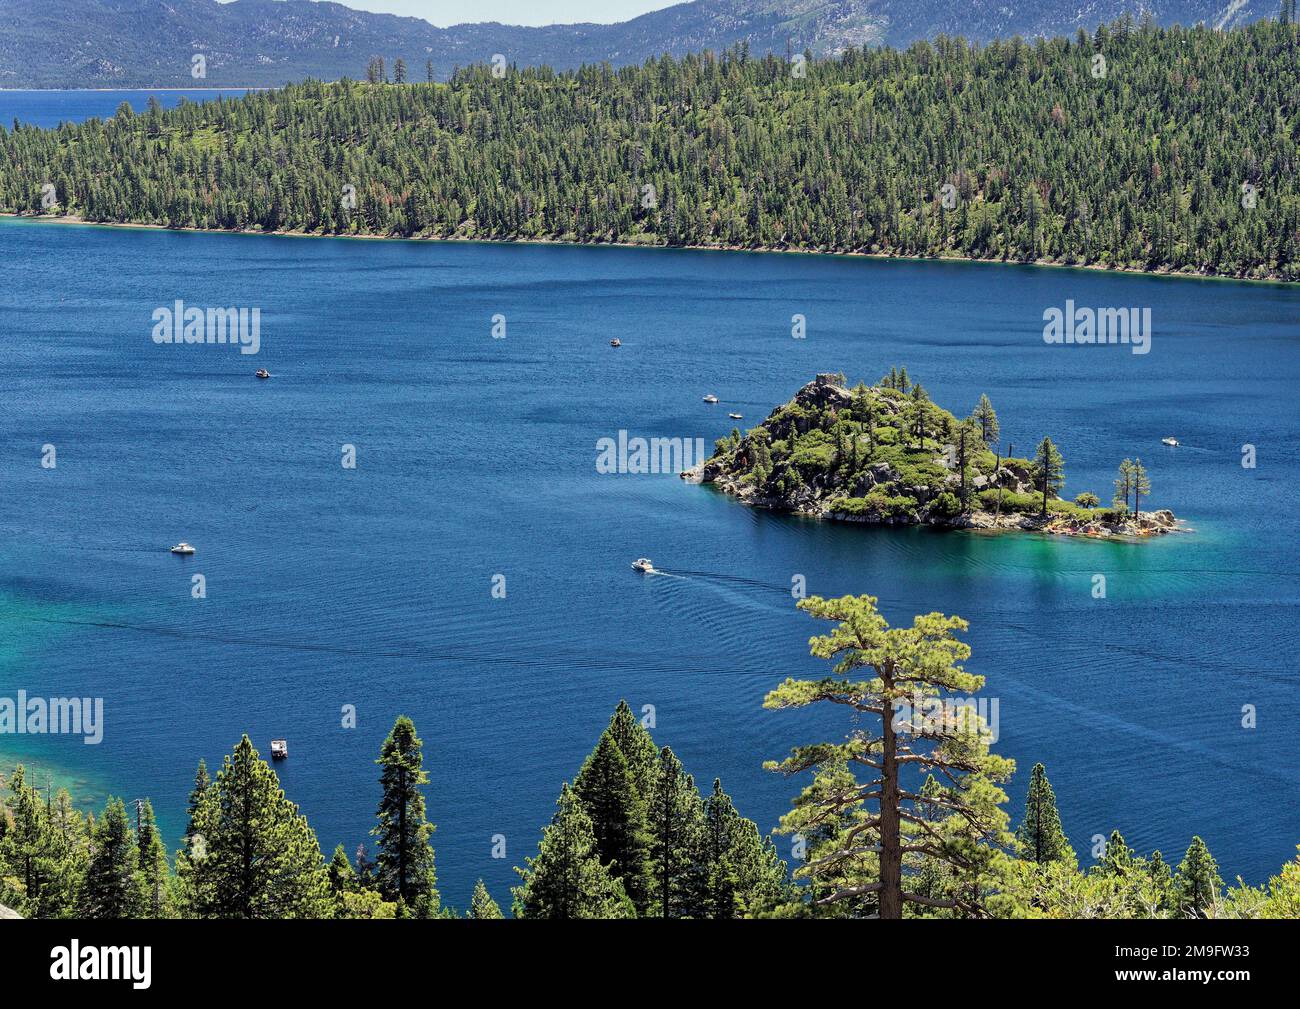 The view of Emerald Bay the only inlet on Lake Tahoe and Fannette Island the only island reputed to be the most photographed on Earth by some. Stock Photo